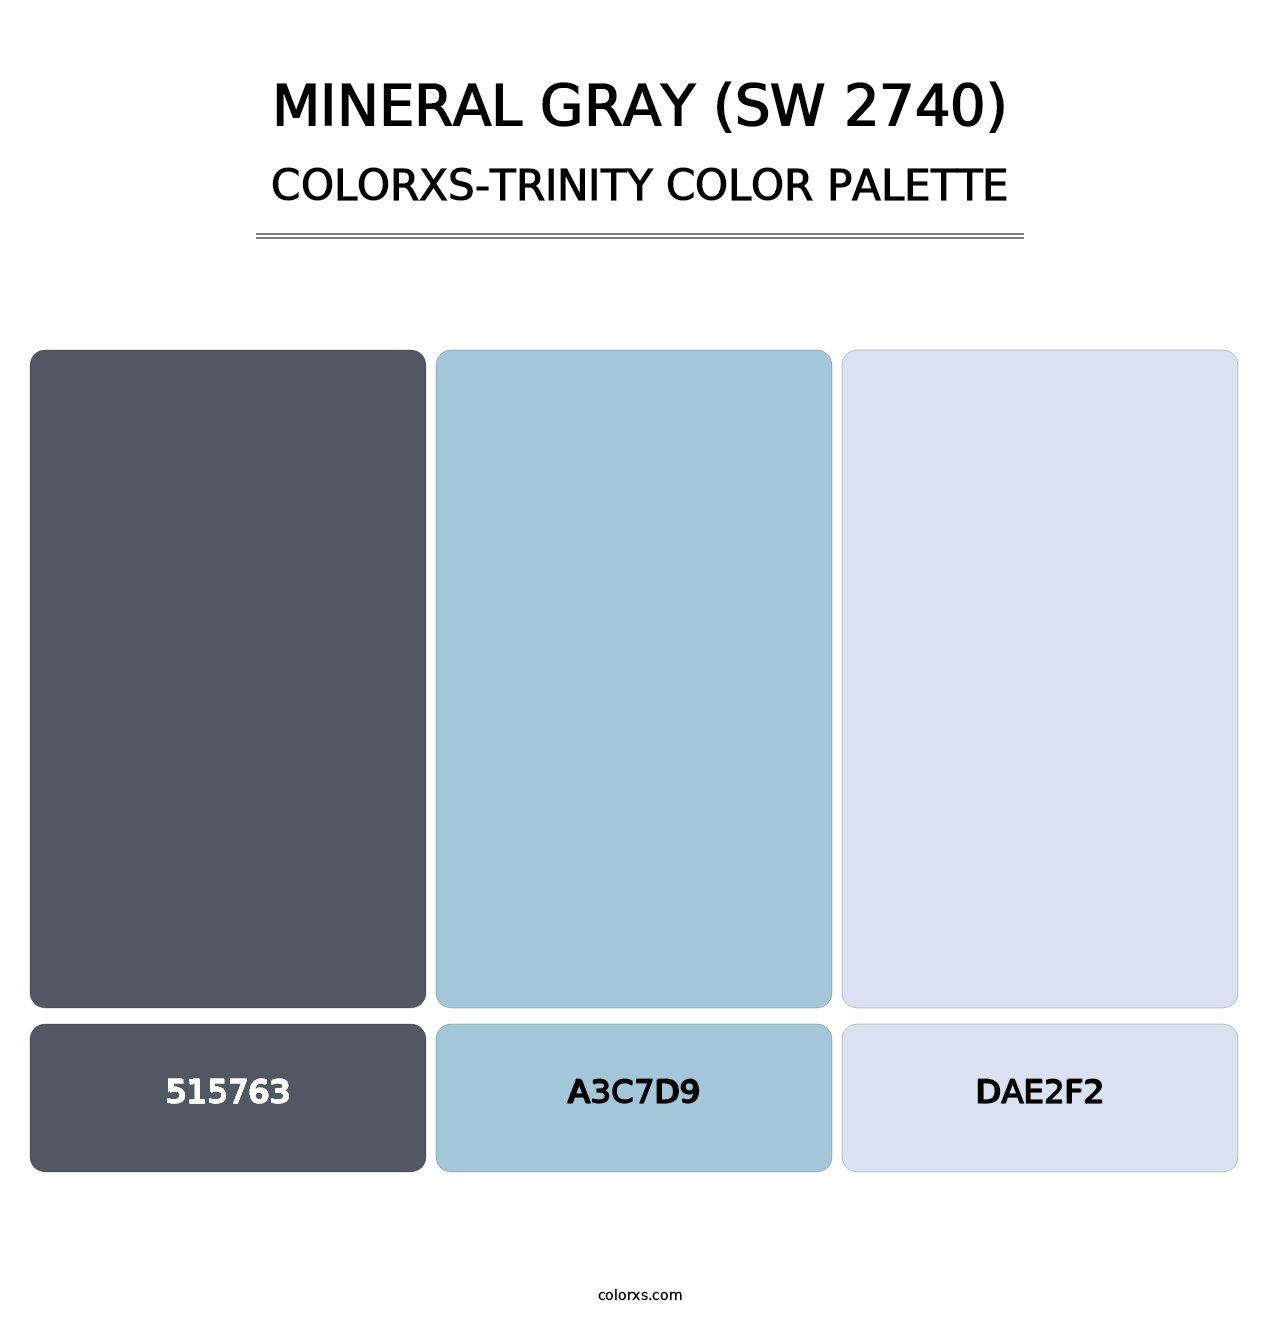 Mineral Gray (SW 2740) - Colorxs Trinity Palette